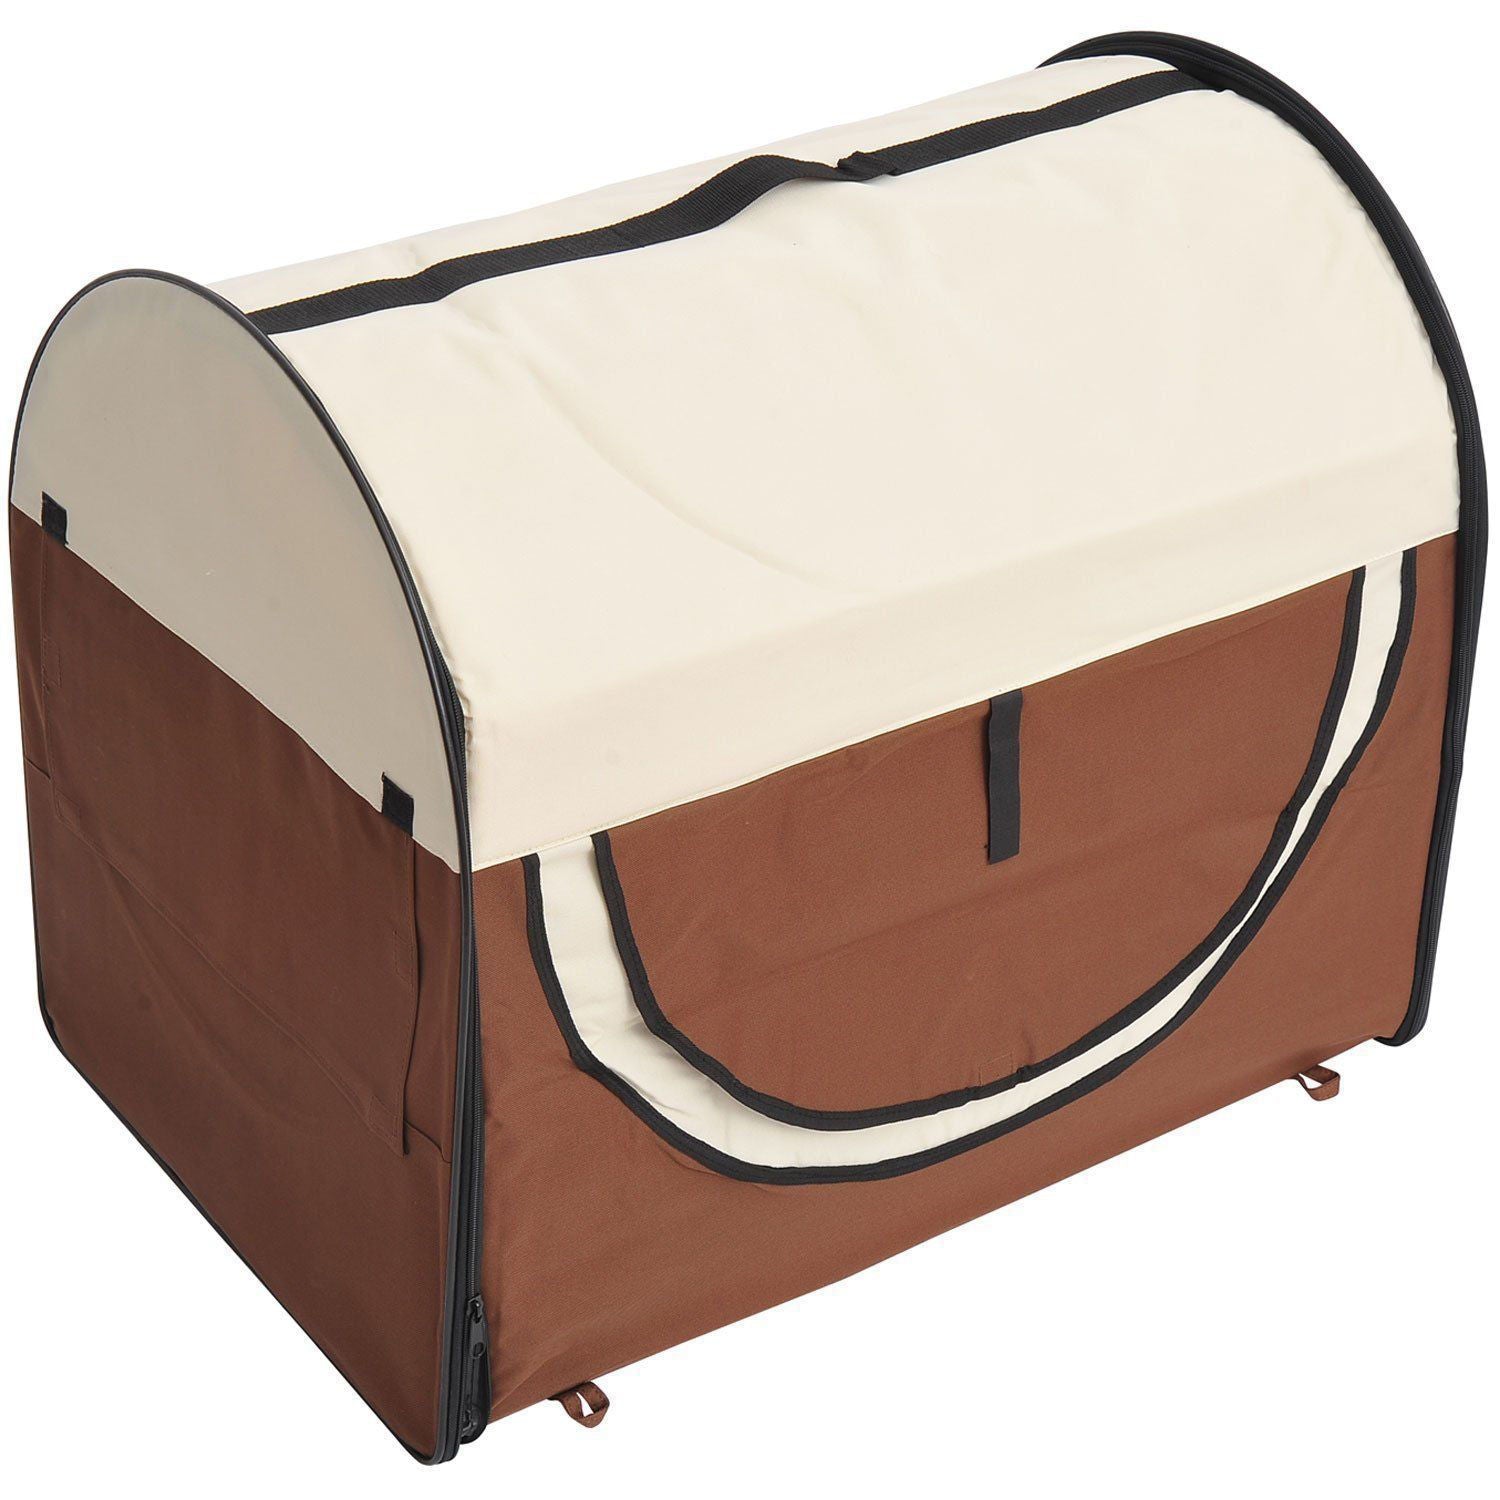 Nancy's Welch Town Opvouwbare Hondentransportbox - Bruin - Stof, Pvc, Staal - 24,02 cm x 18,11 cm x 20,08 cm